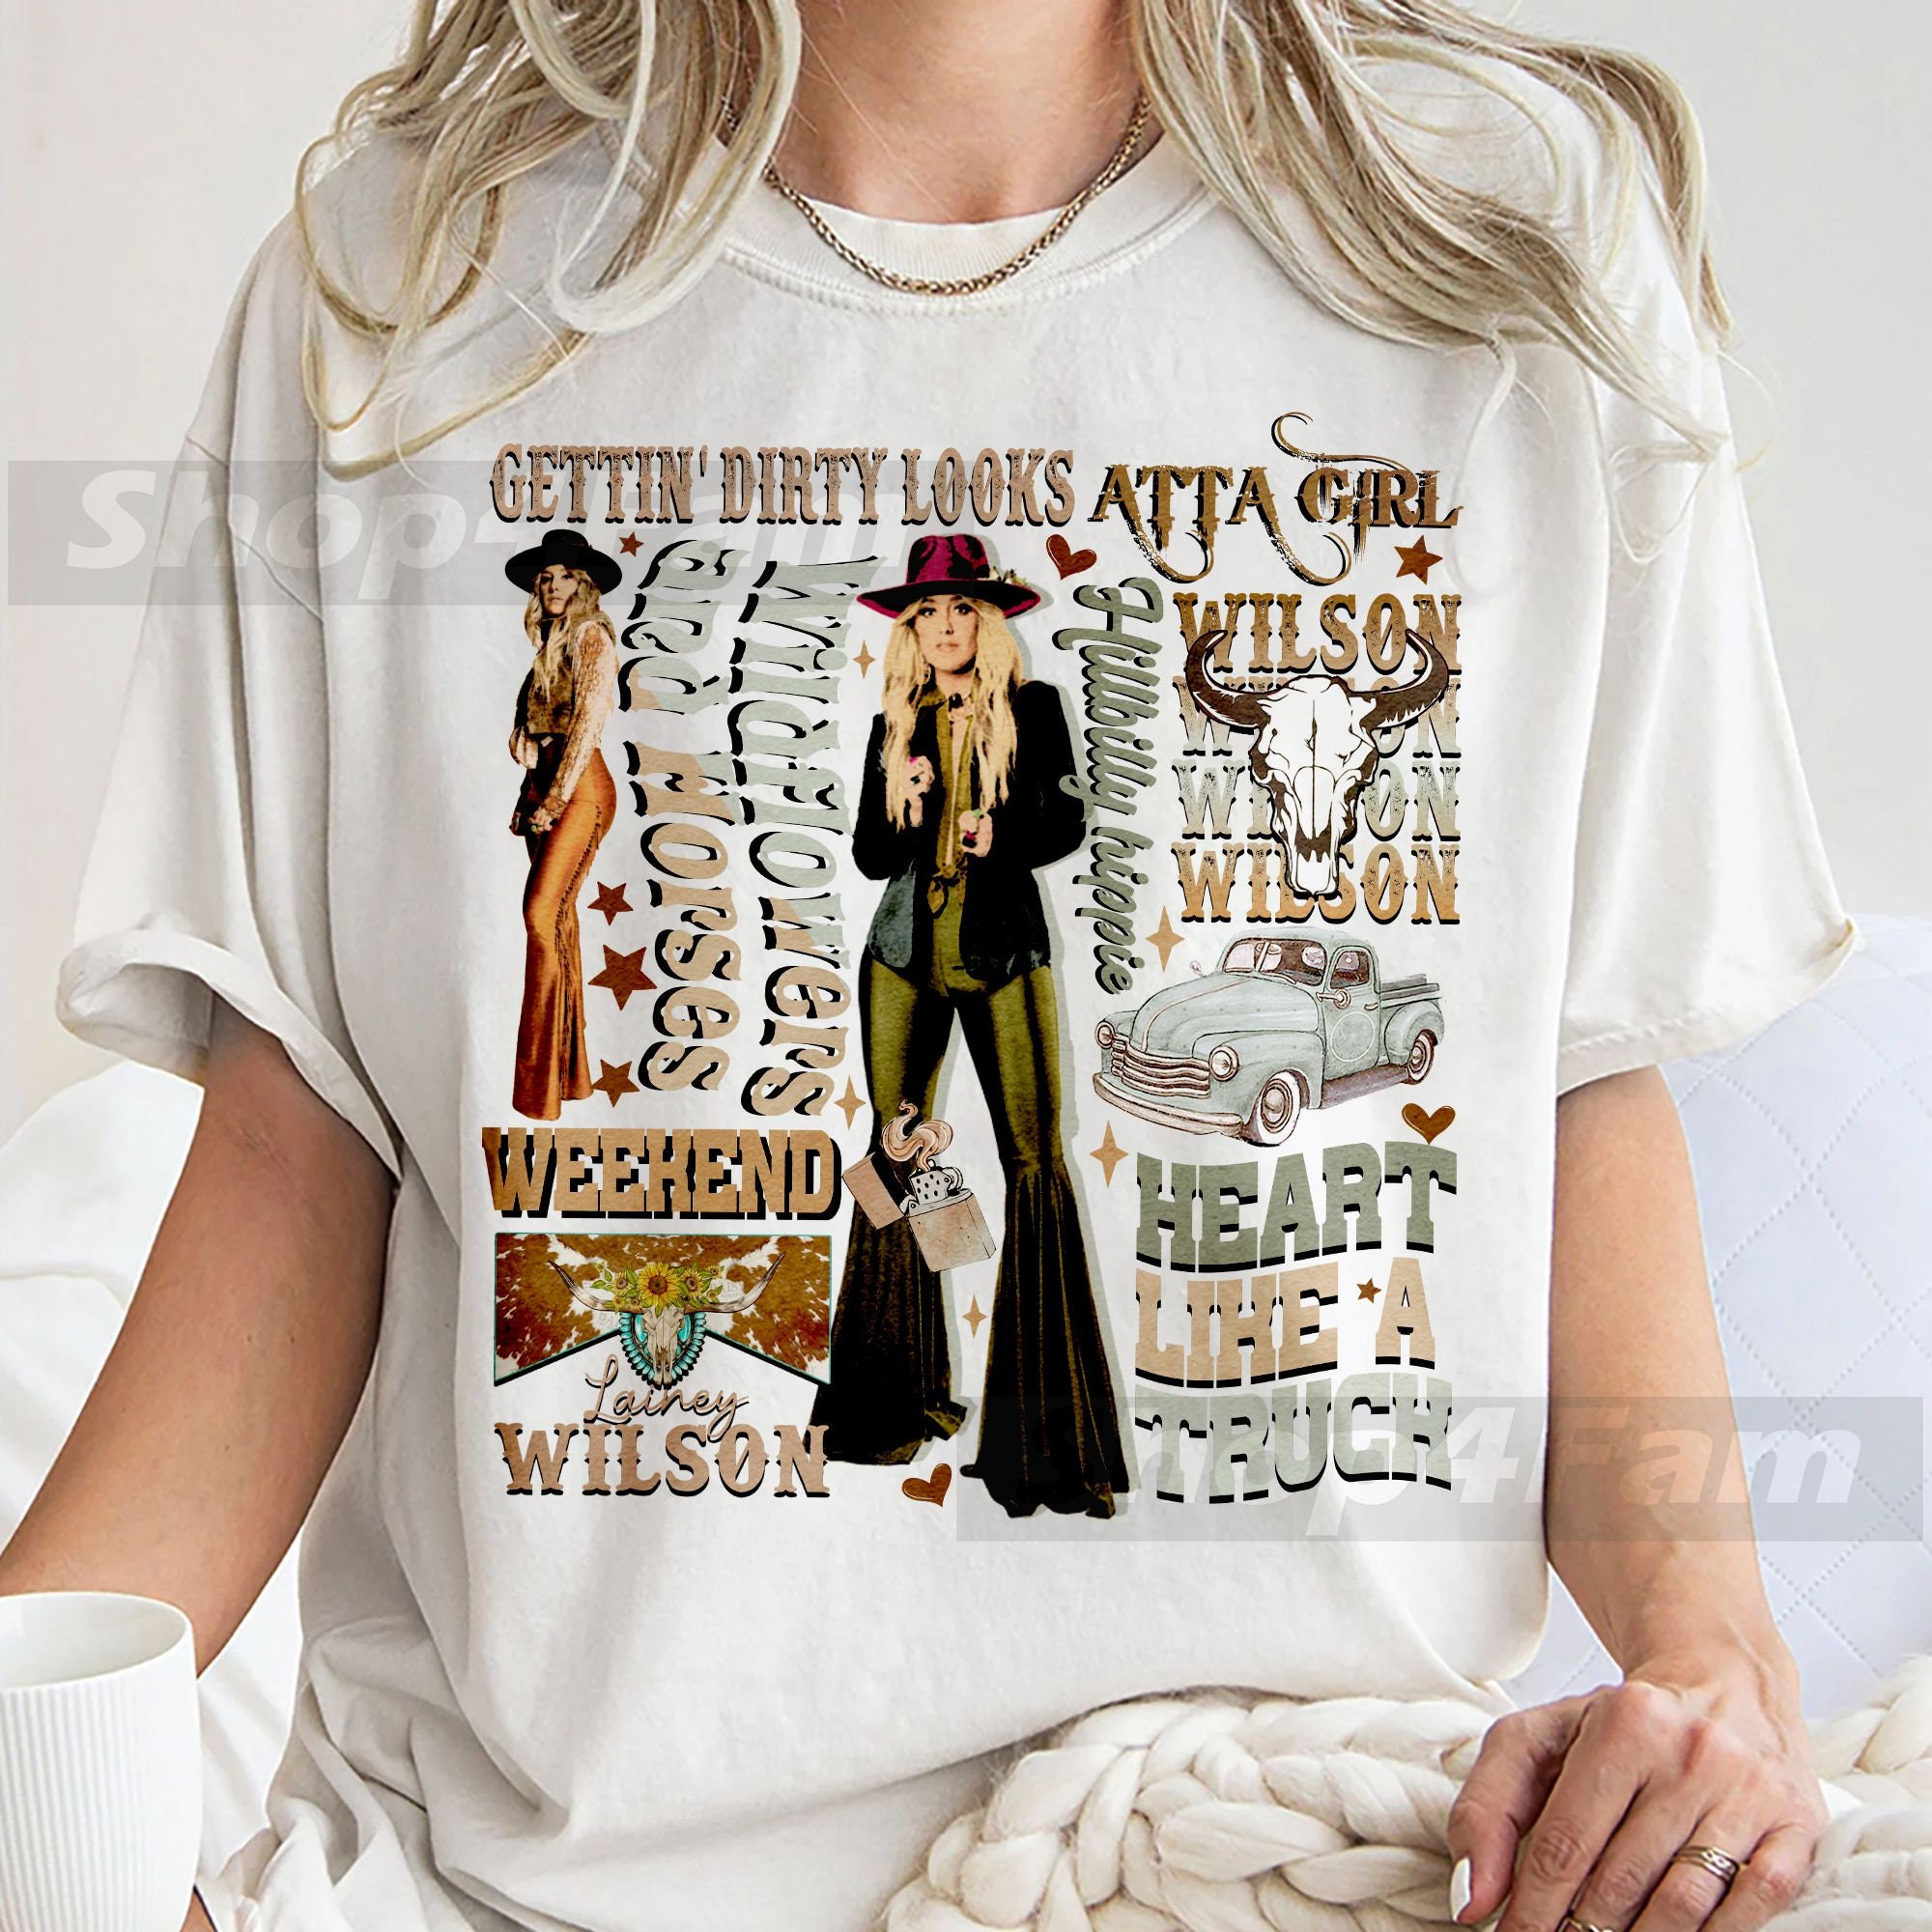 Lainey Wilson Hat Photo Adult Short Sleeve T Shirt Country Music Singer  Vintage Style Graphic Tees